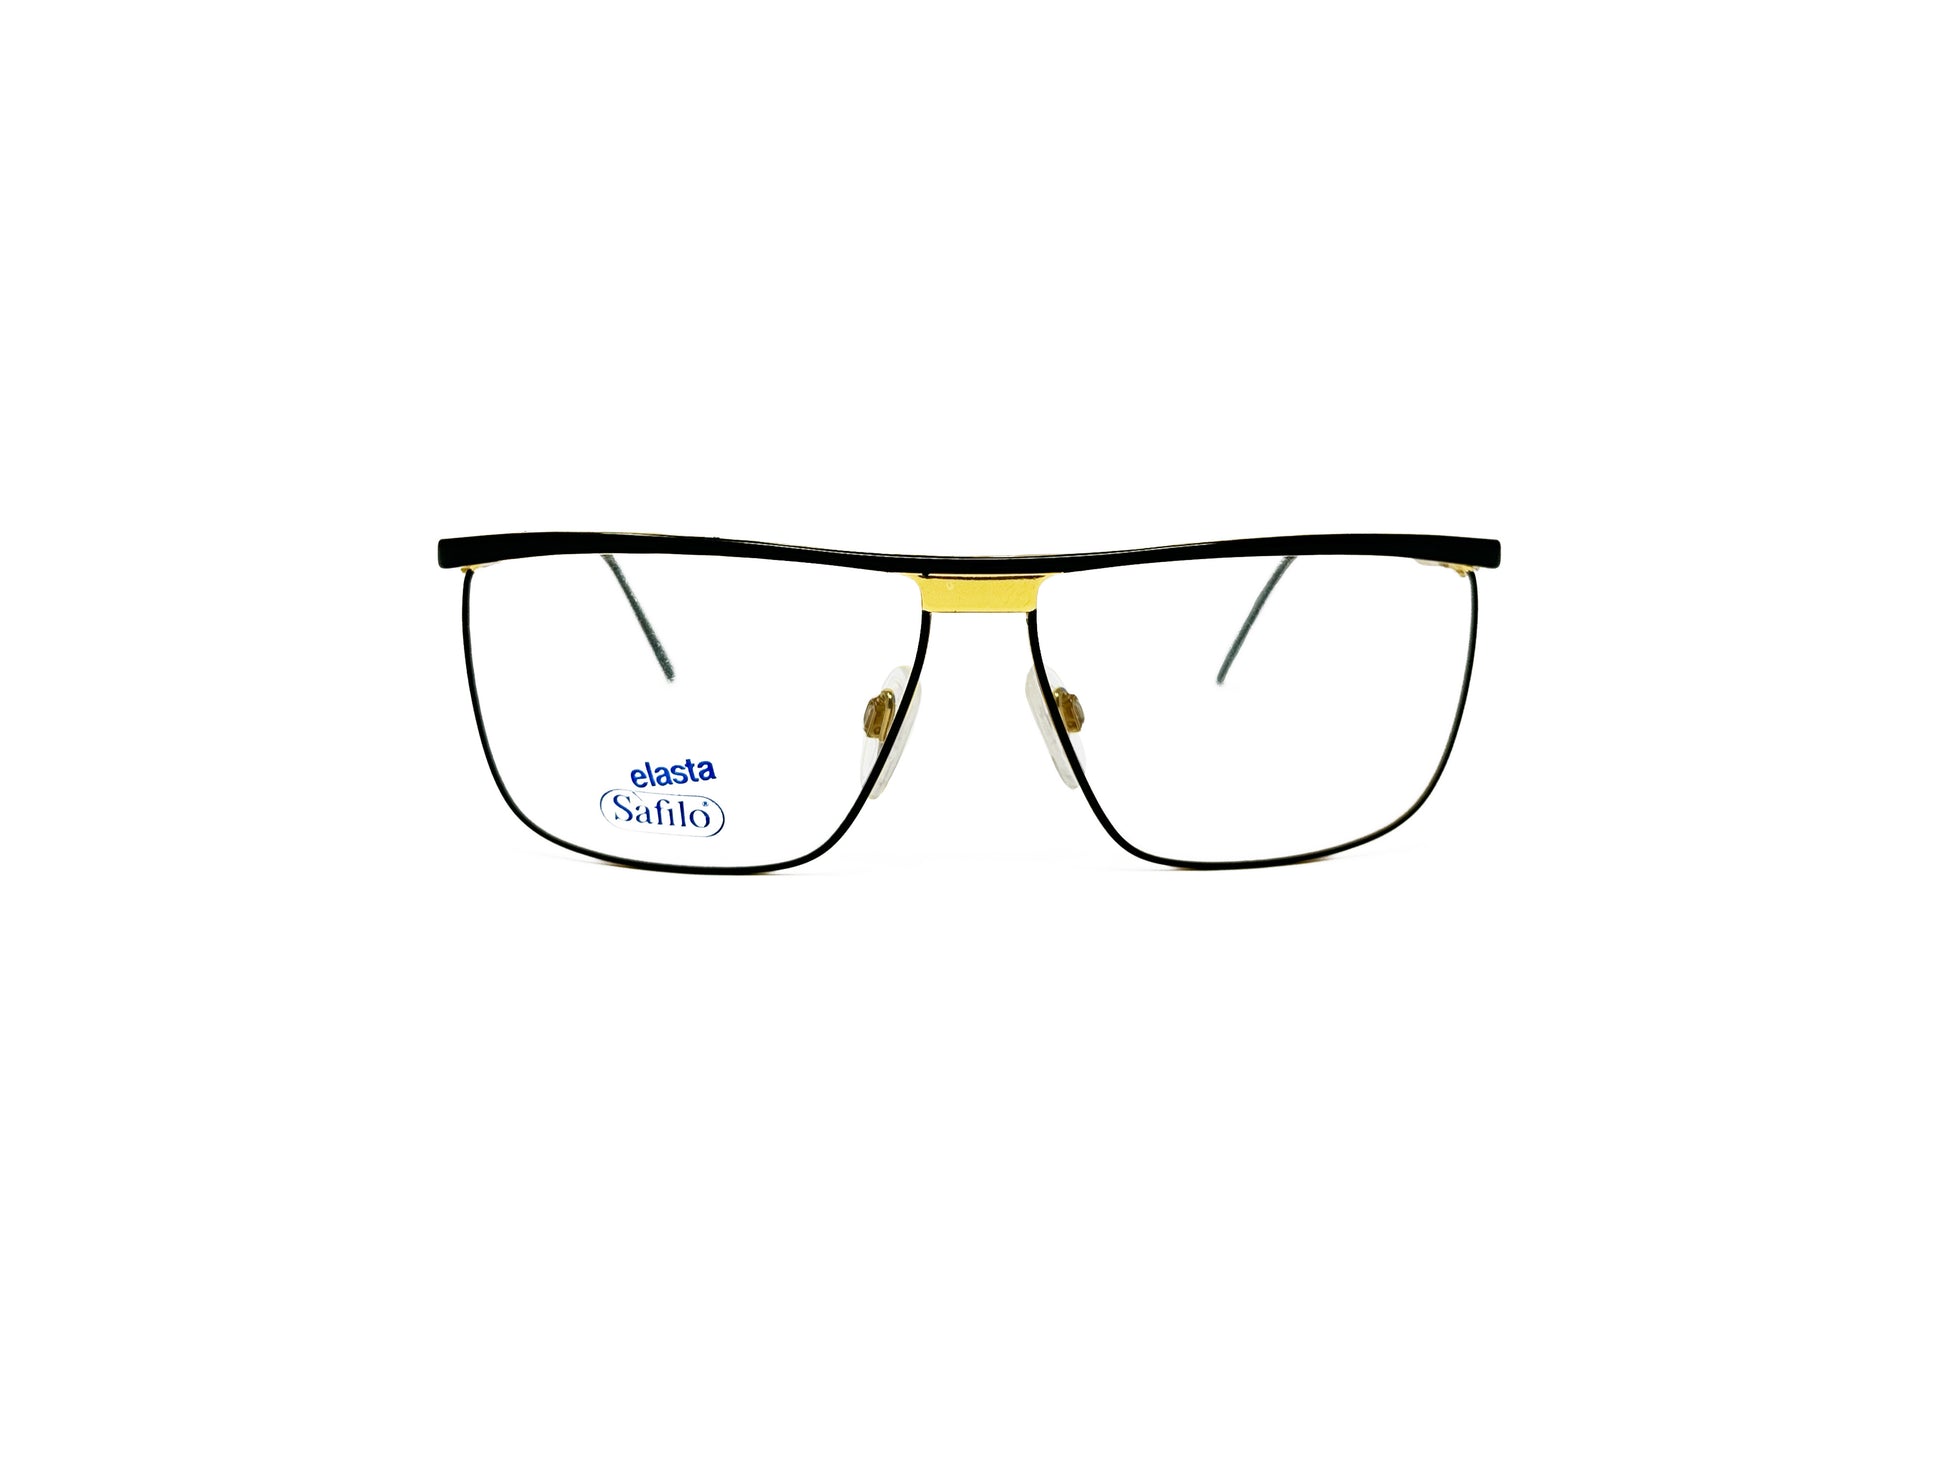 Safilo flattop wire optical frames with gold piece at the top of the nose bridge. Model: Flattop. Color: 70C - Black with gold on bridge. Front view. 